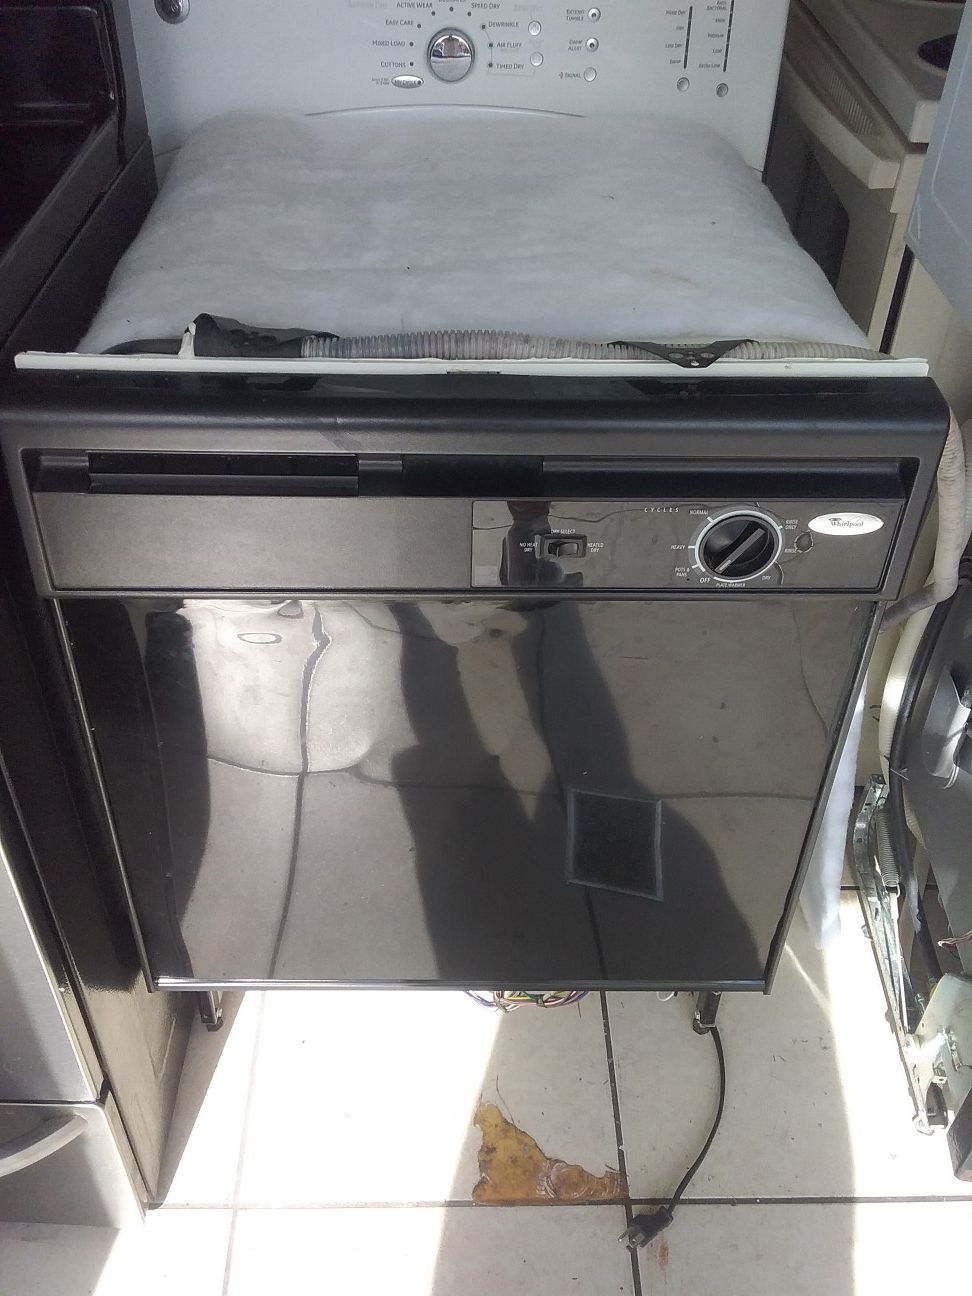 Black whirlpool dishwasher with plastic tub in good working condition